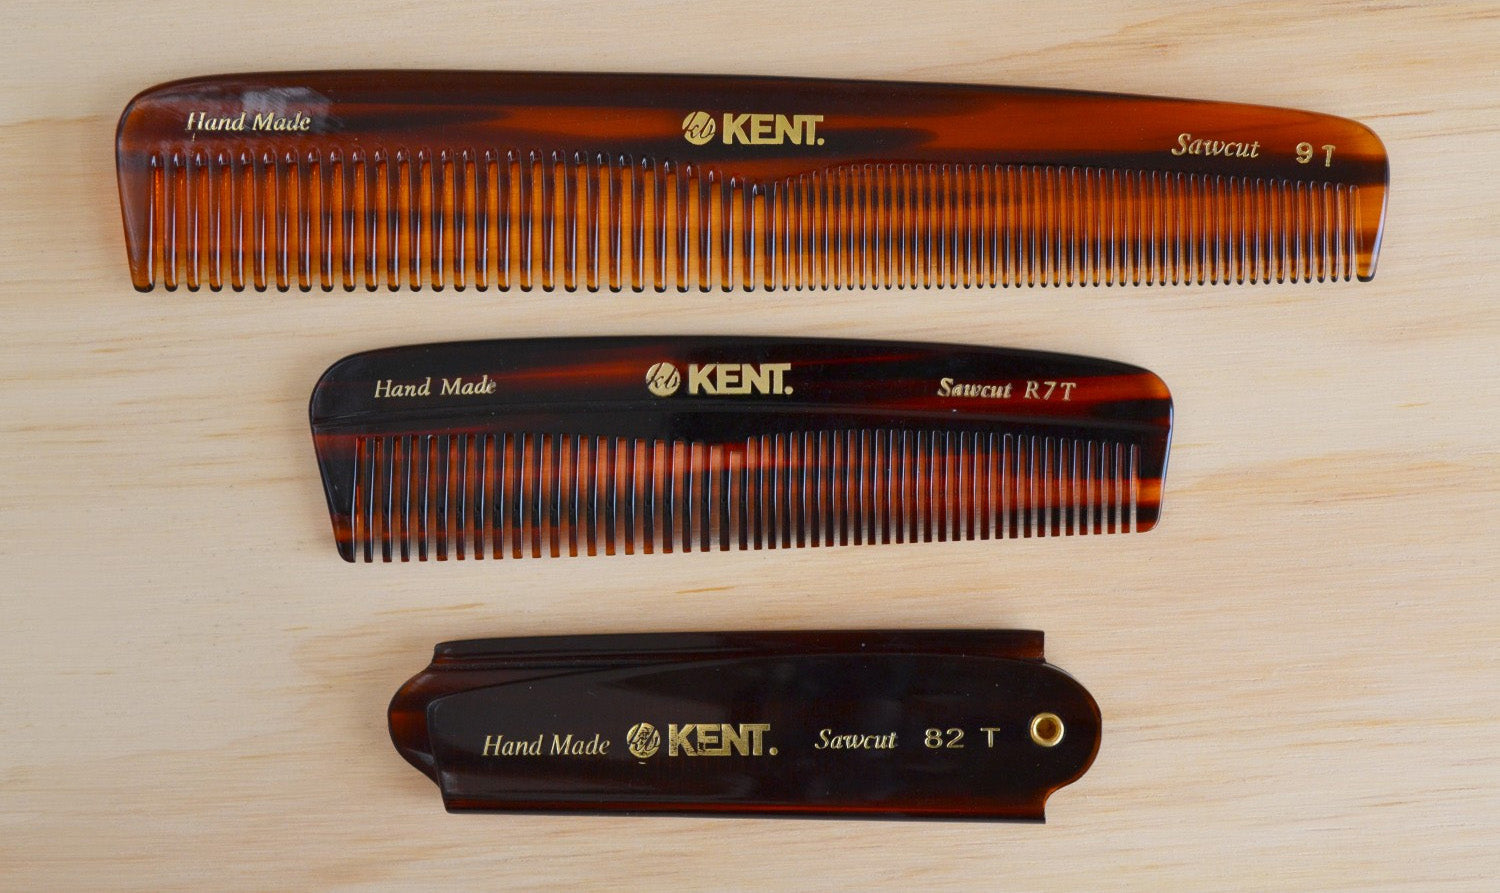 Kent Combs And Brushes